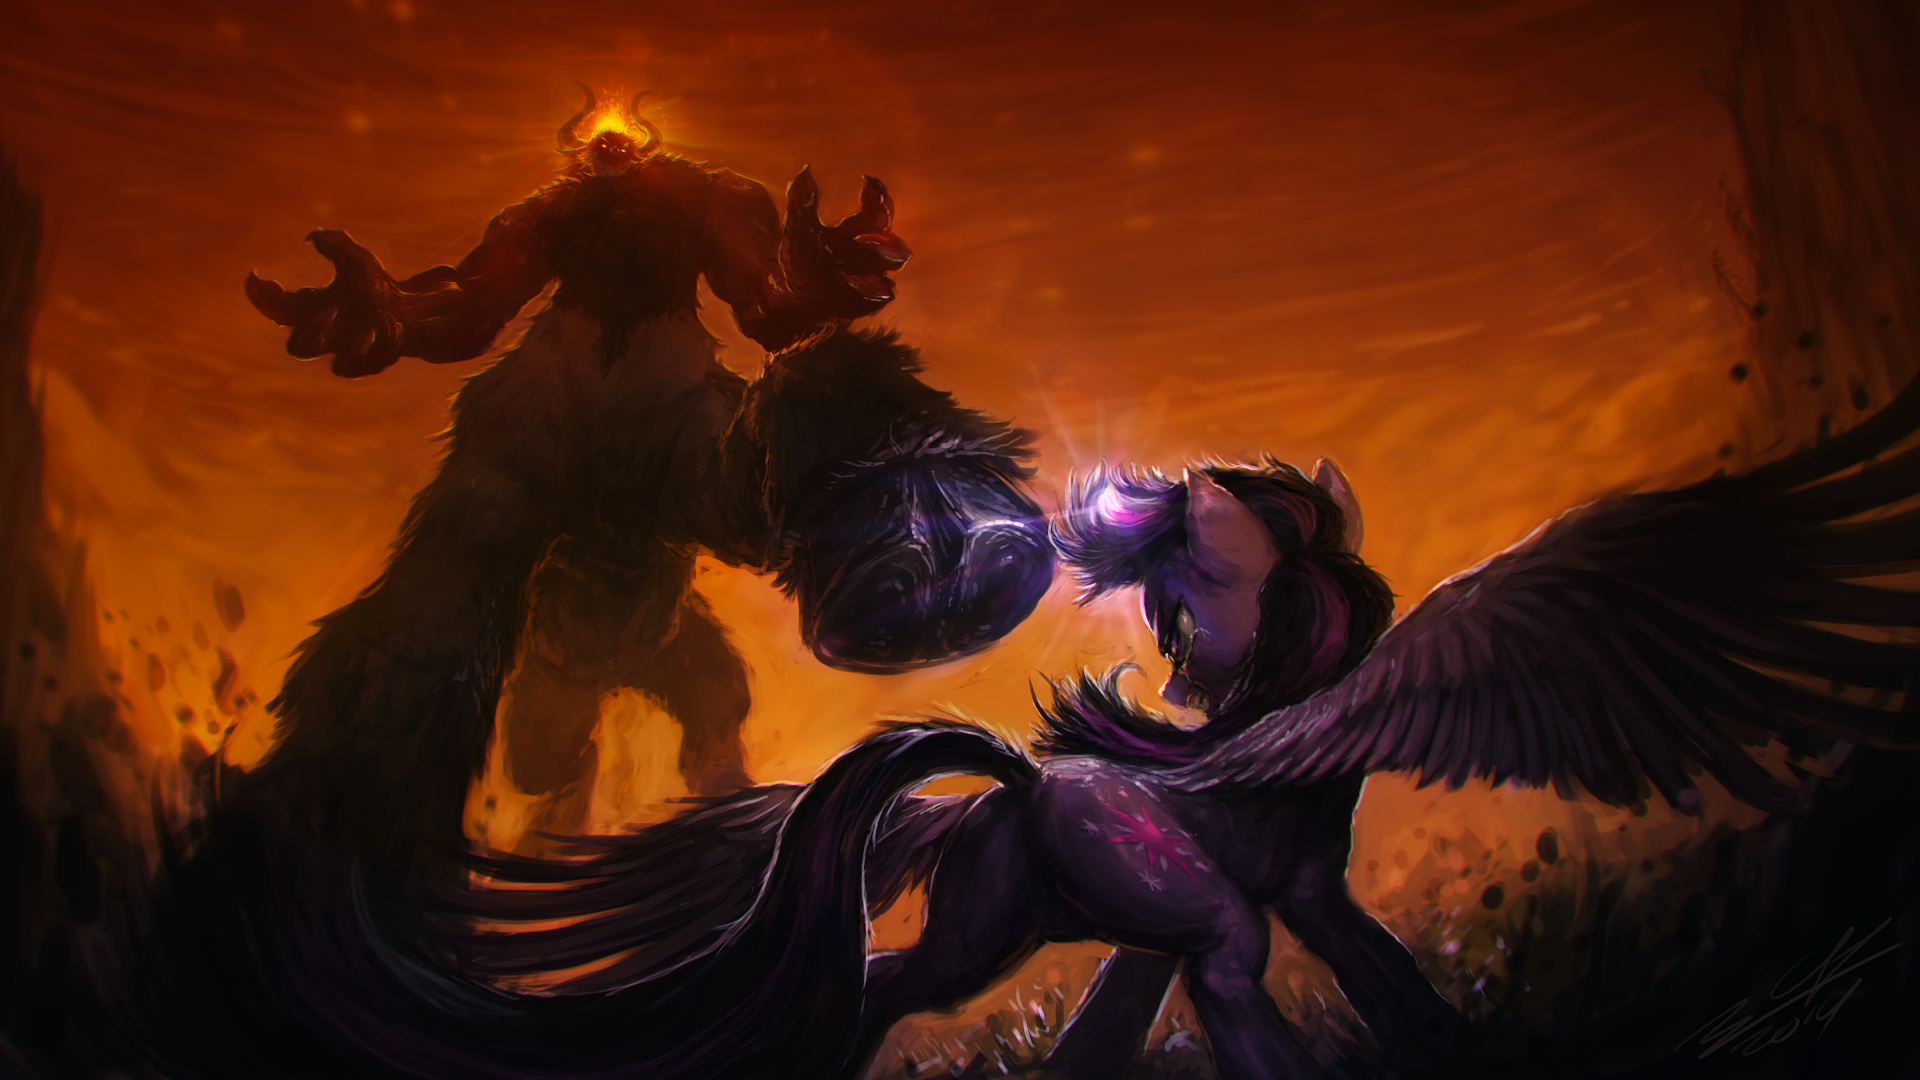 [Bild: reign_of_magic_by_assasinmonkey-d7isdpx.png]